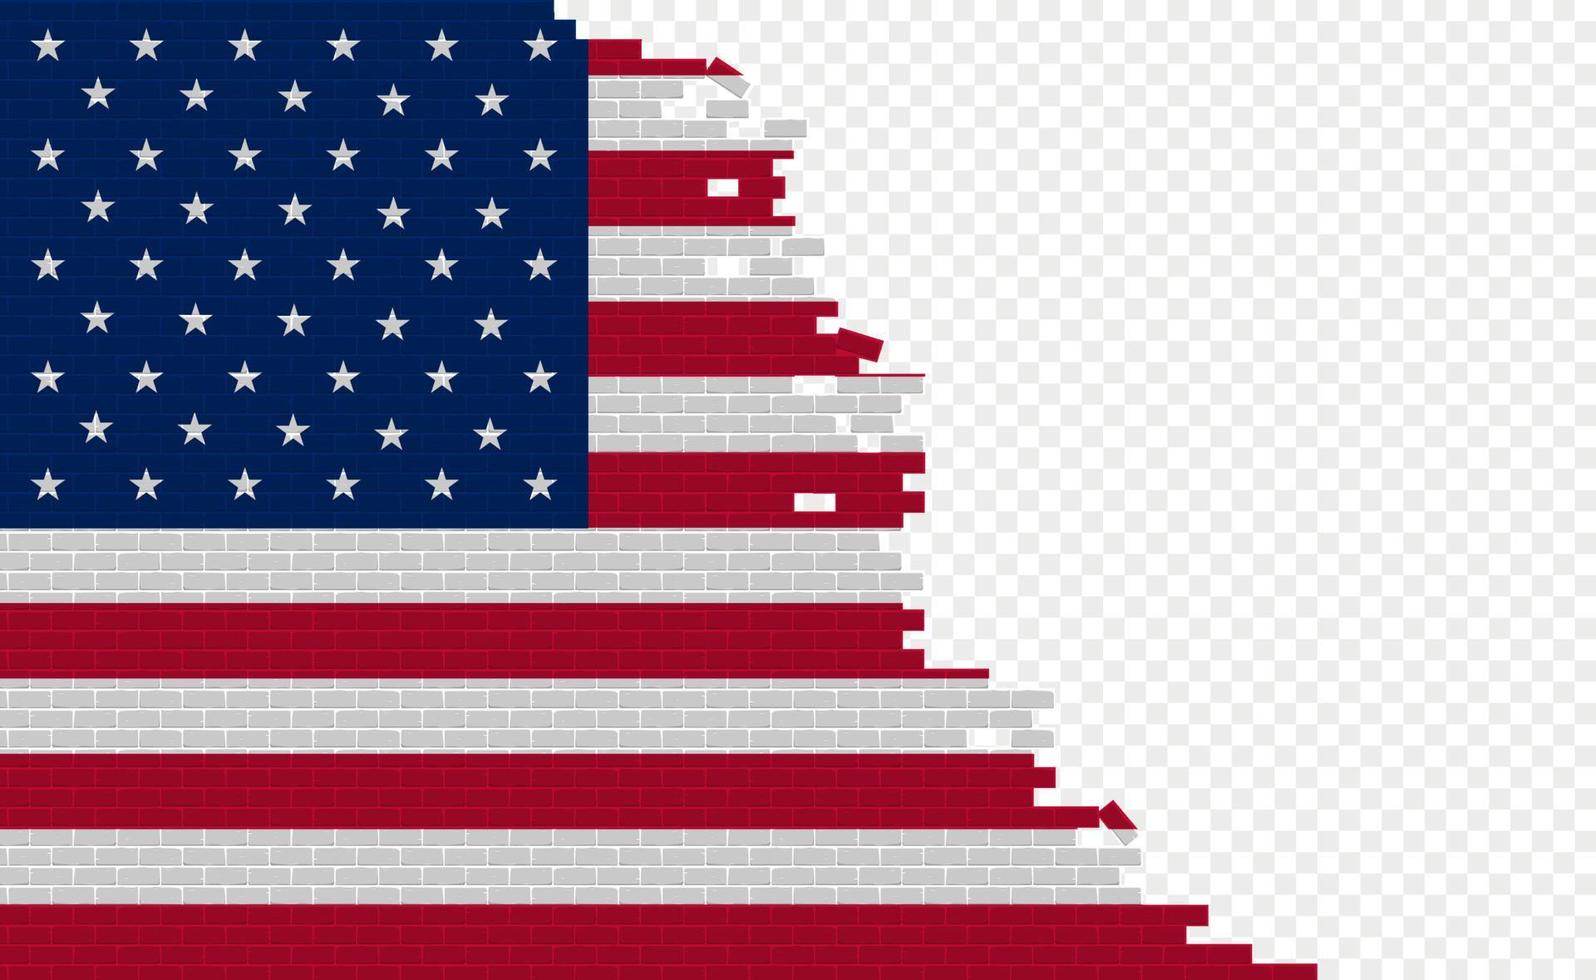 United States flag on broken brick wall. Empty flag field of another country. Country comparison. Easy editing and vector in groups.